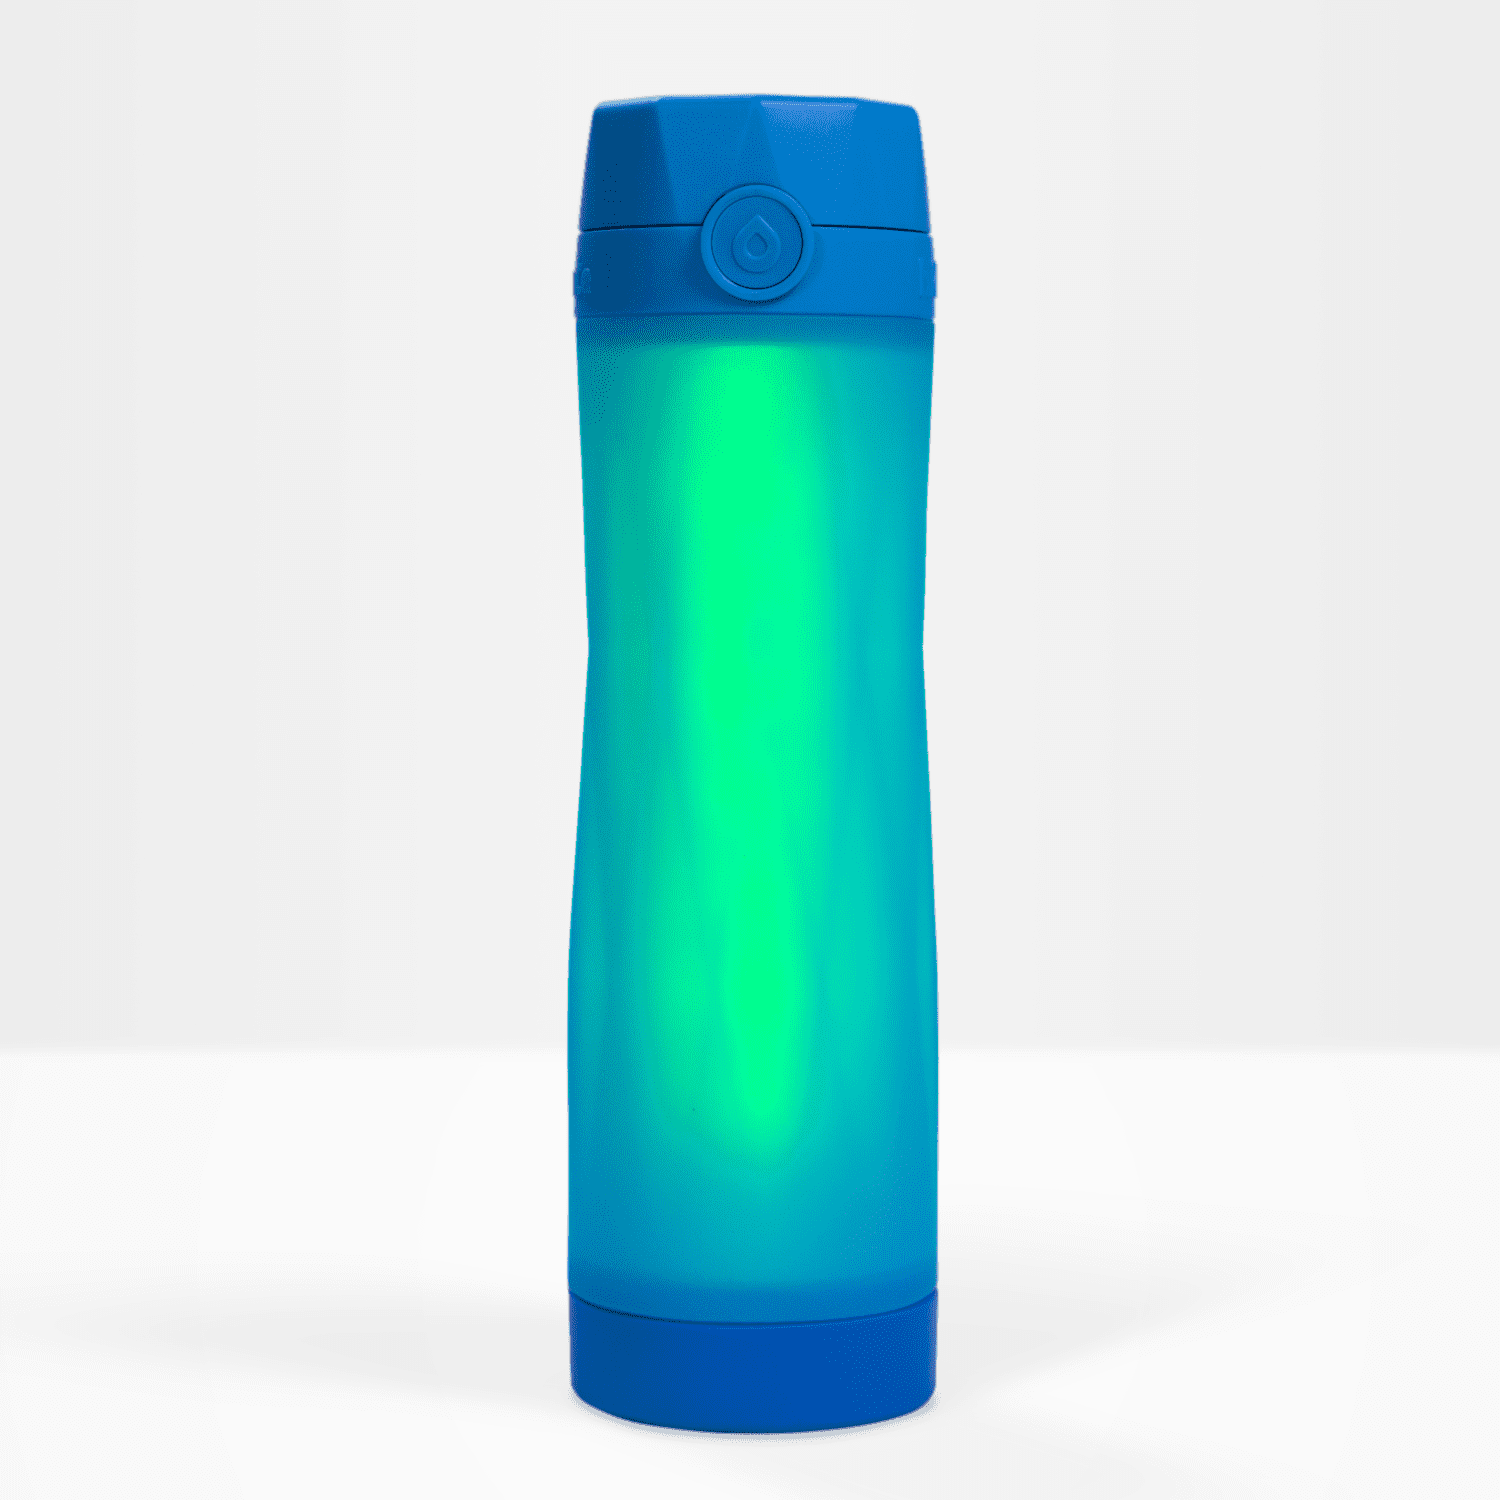 Tracks Water Intake & Glows to Remind You to Stay Hydrated Hidrate Spark 3 Smart Water Bottle 